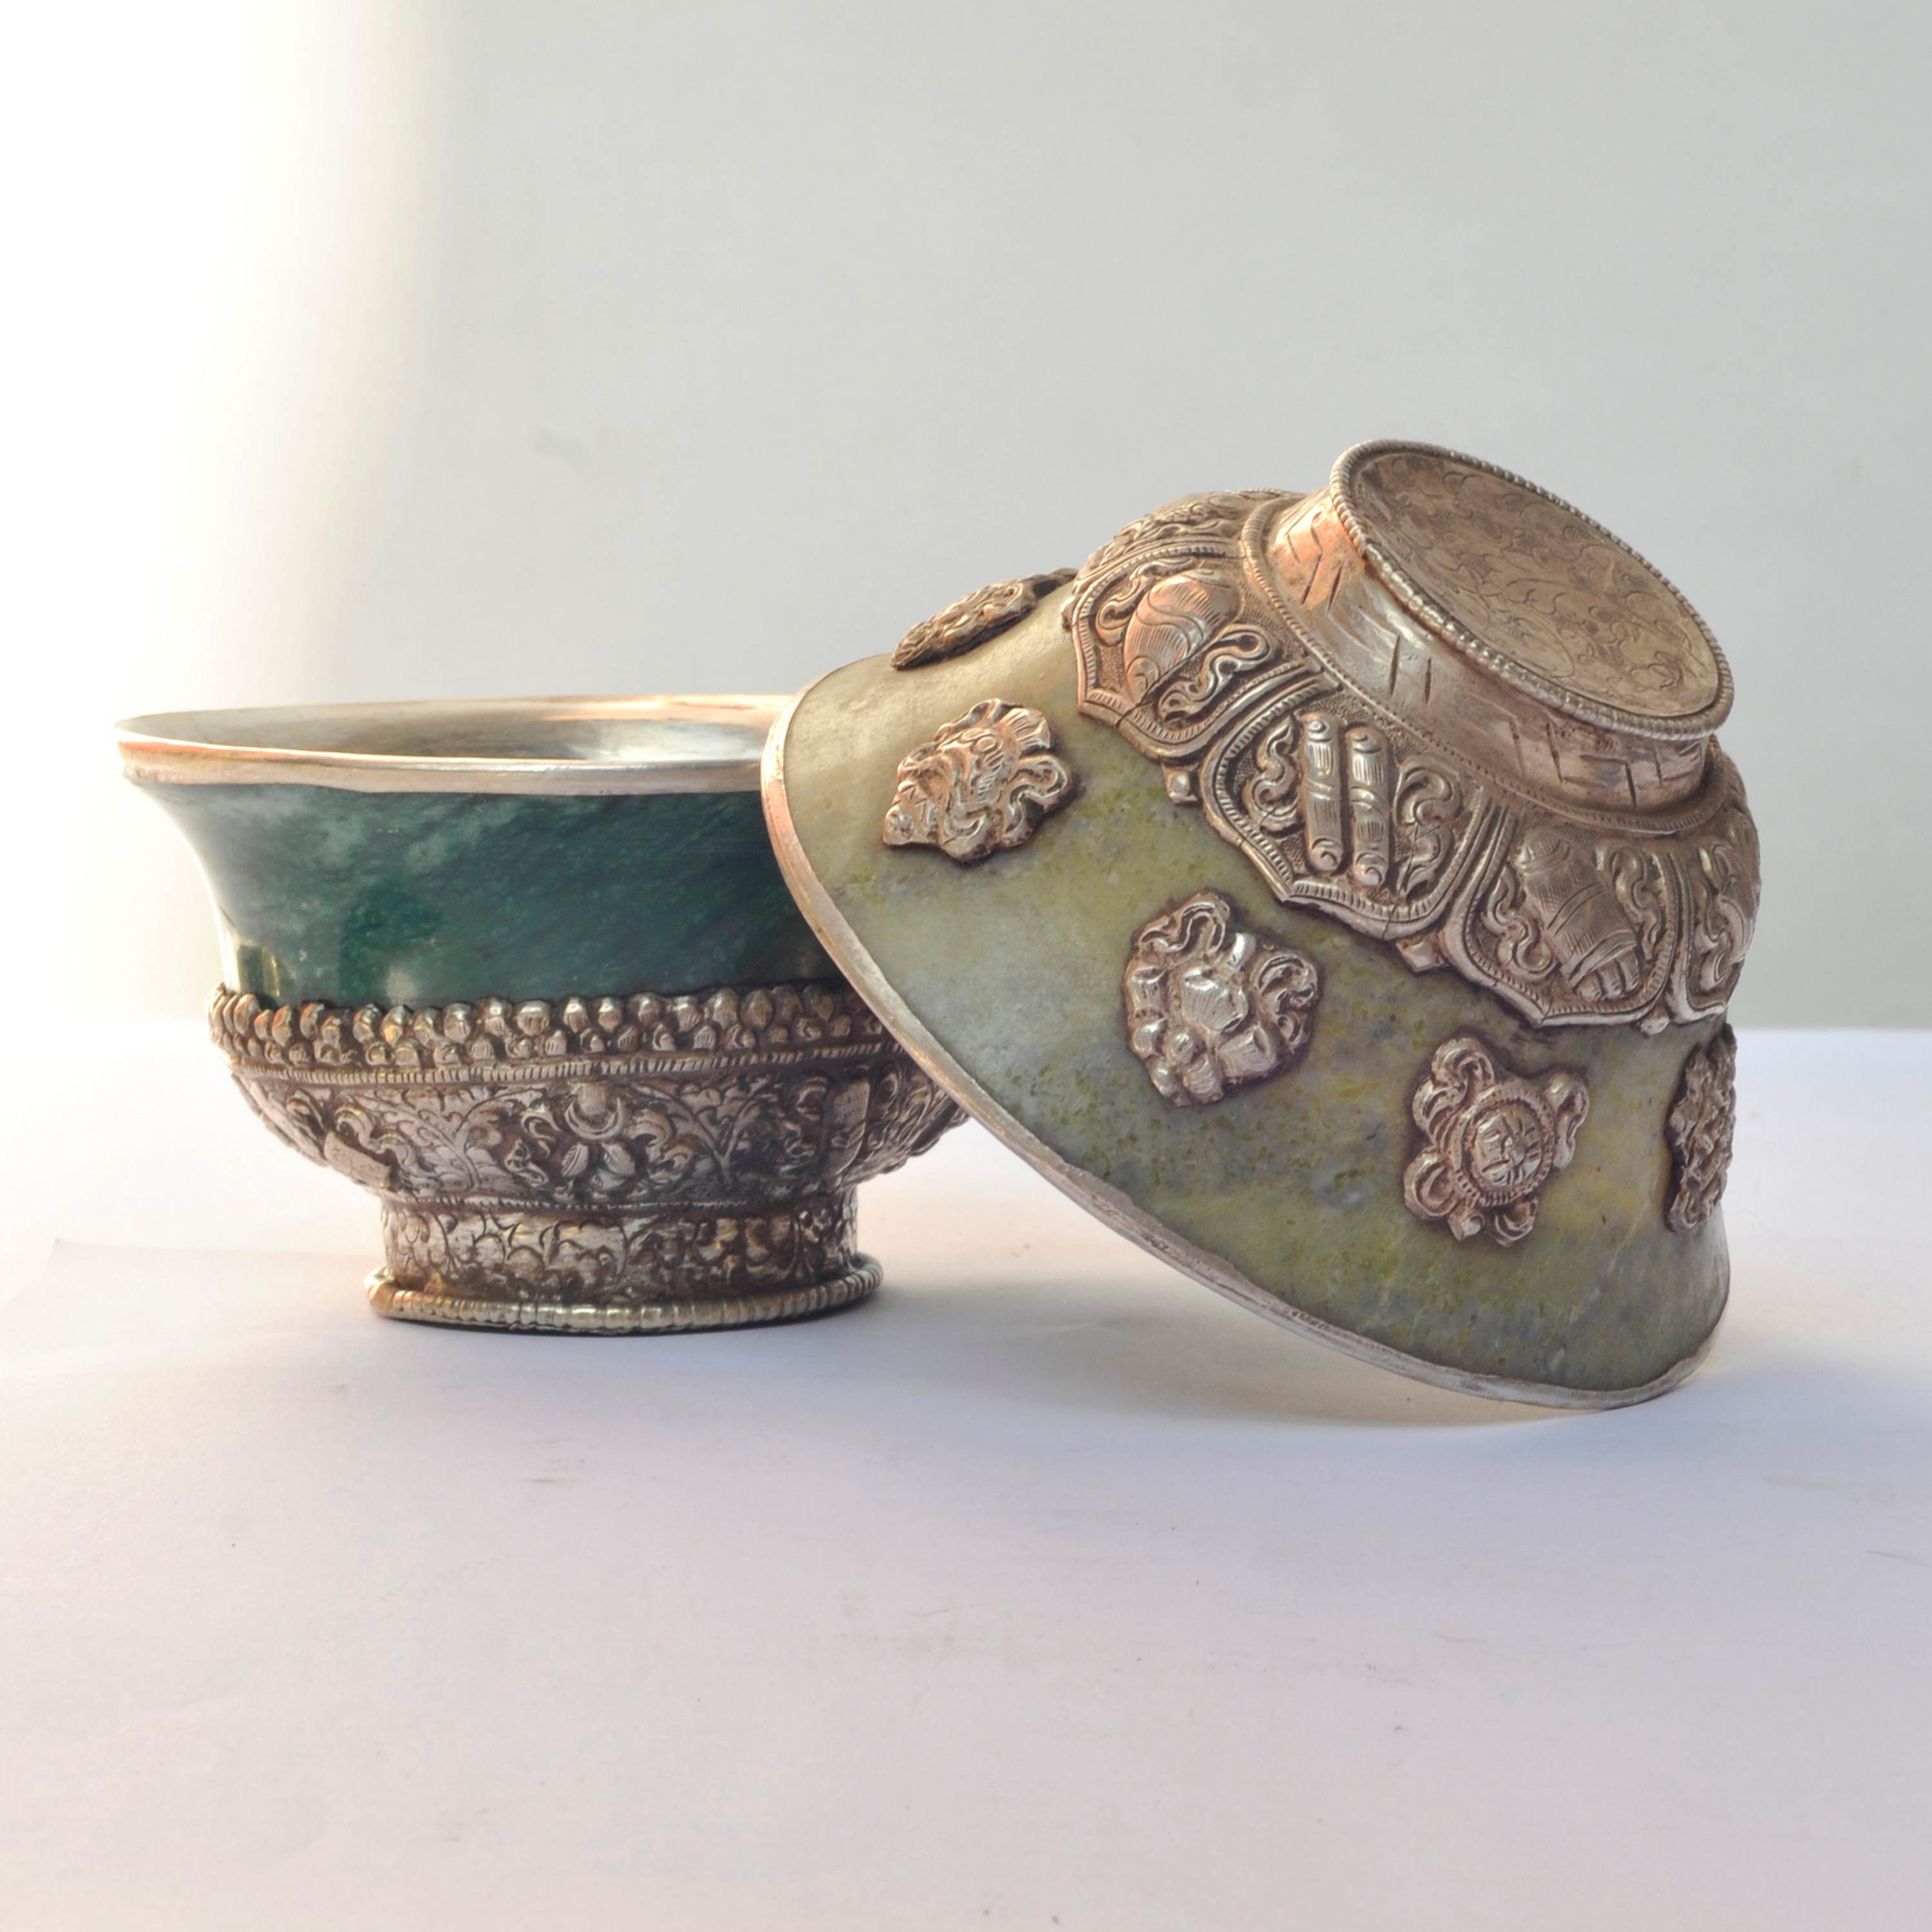 Silver Cup With Emitted amber Offering Bowls, silver Carving, With Ashtamangal Design